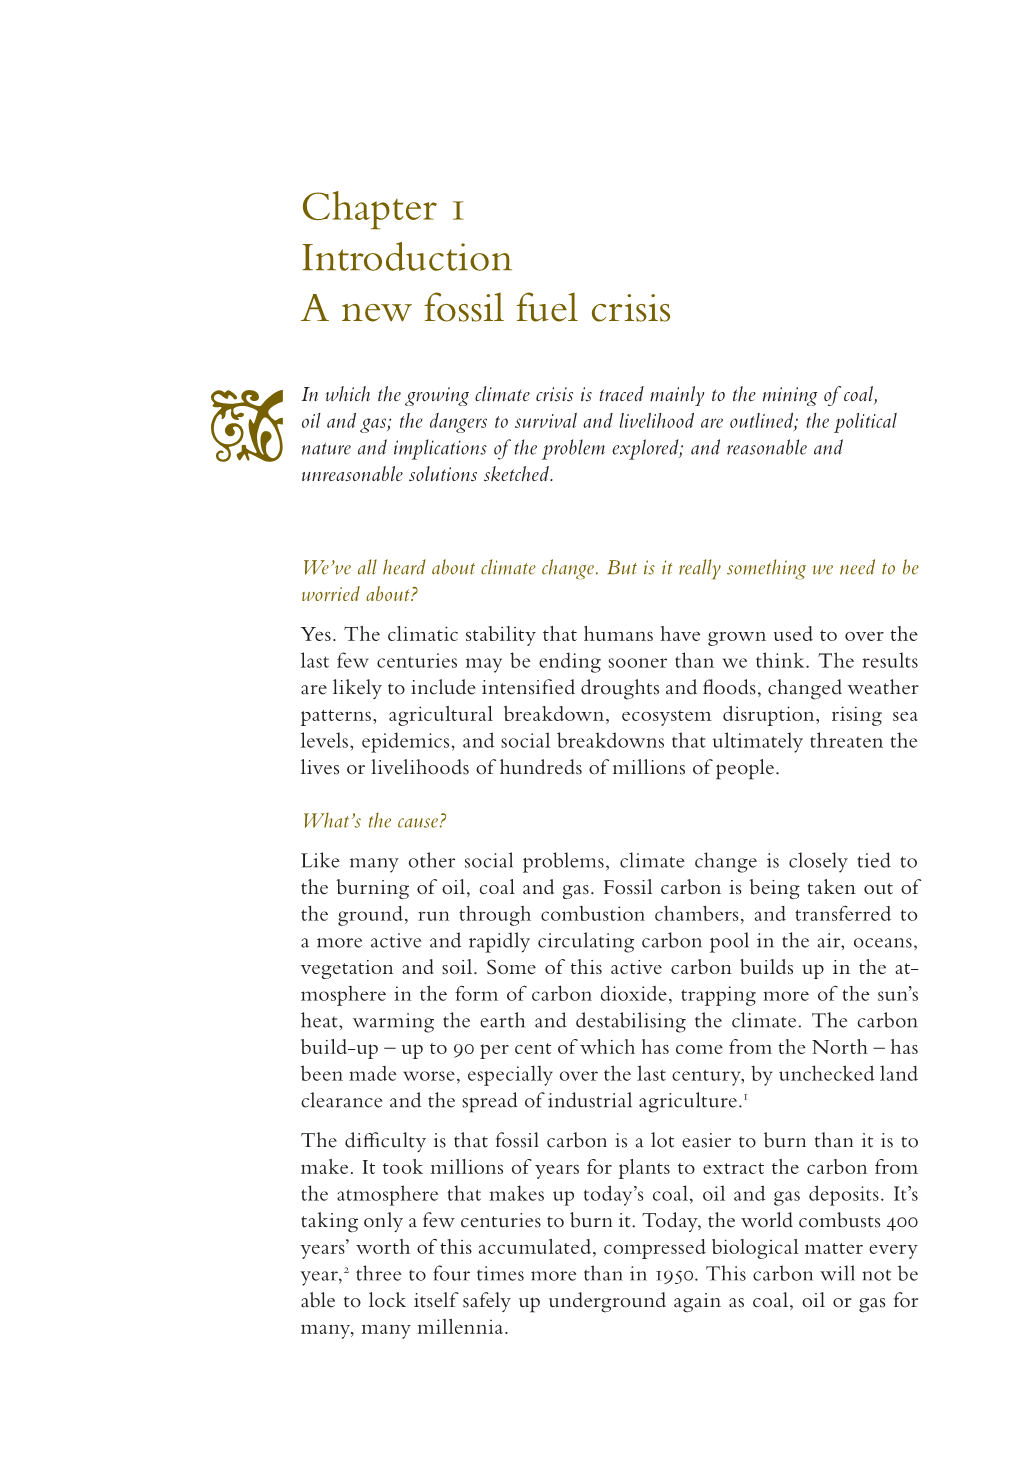 Chapter 1 Introduction a New Fossil Fuel Crisis